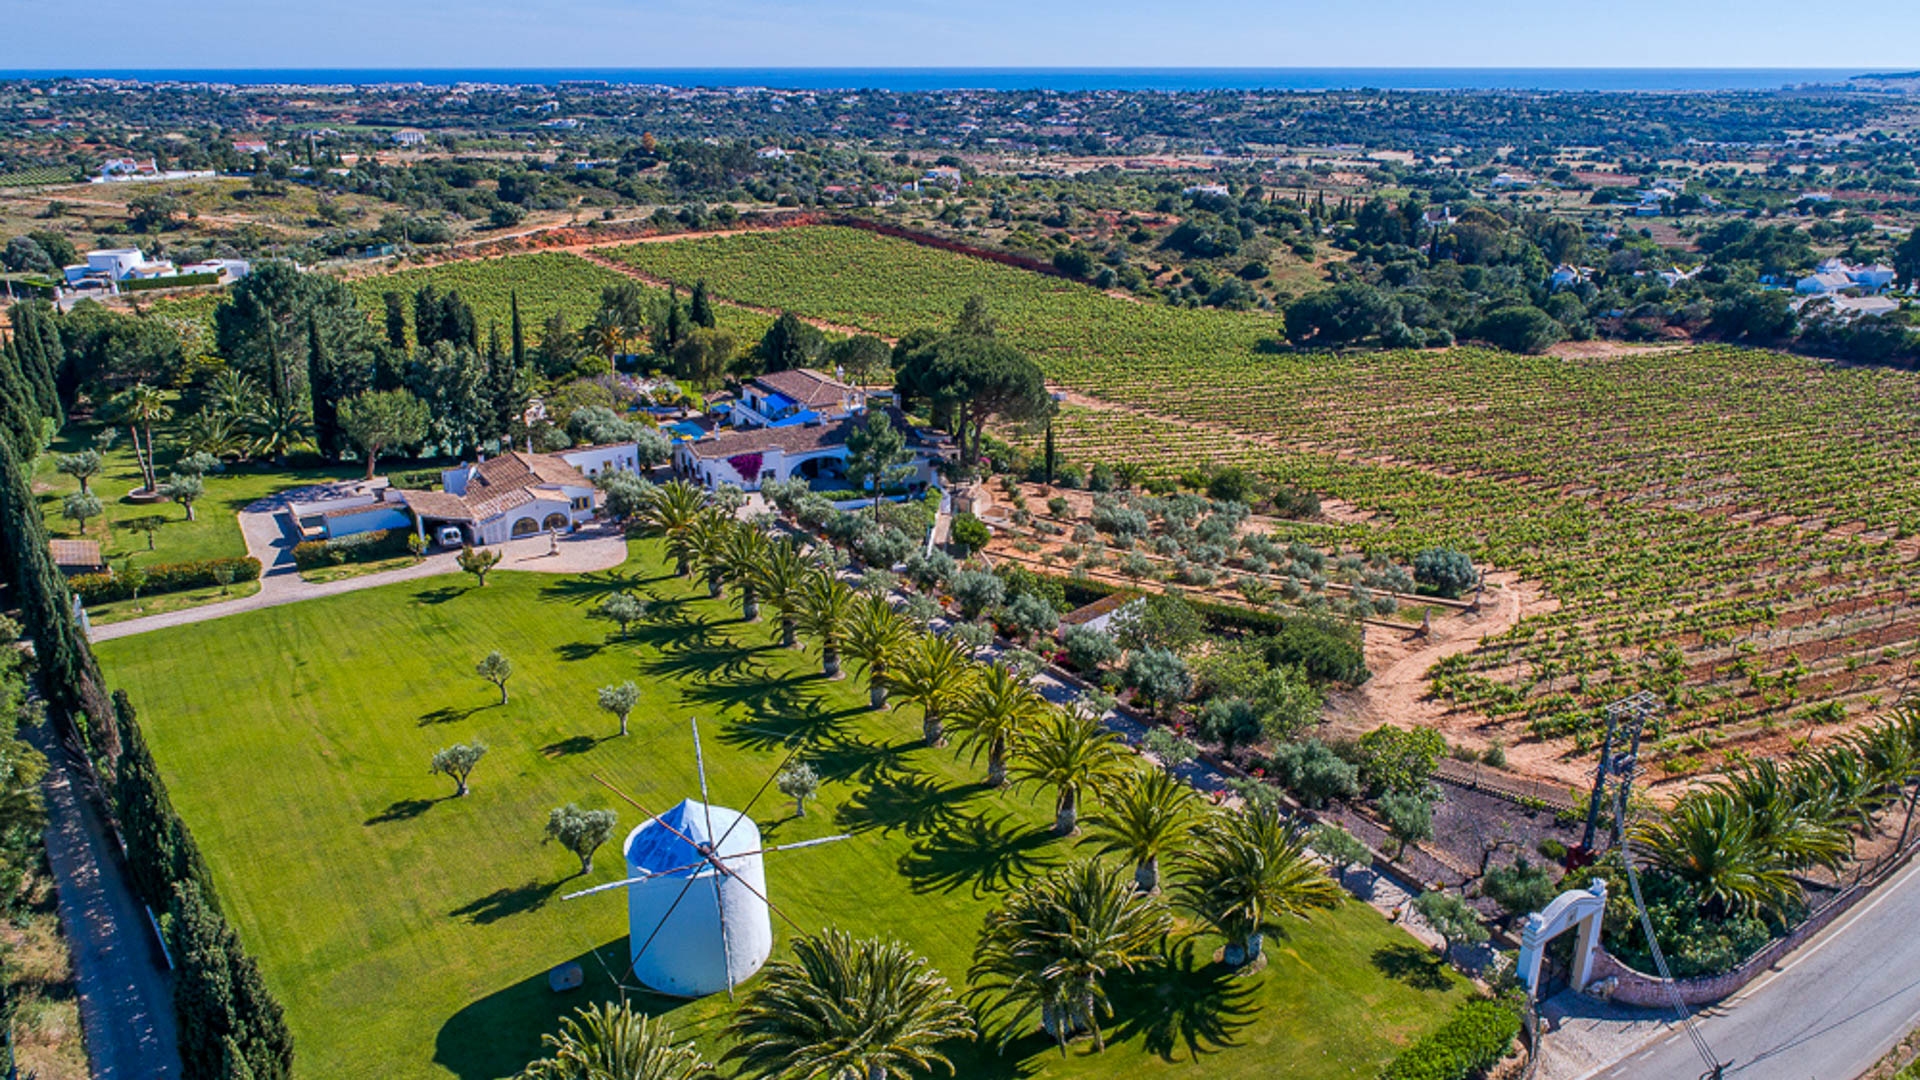 Majestic Country Estate set in 11.7ha of Vineyards, Guia | VM1966 A magical retreat set within 11.7 hectares of vineyard and stunning Mediterranean gardens. Business opportunity to create a boutique hotel or enjoy a large family home close to beaches and amenities